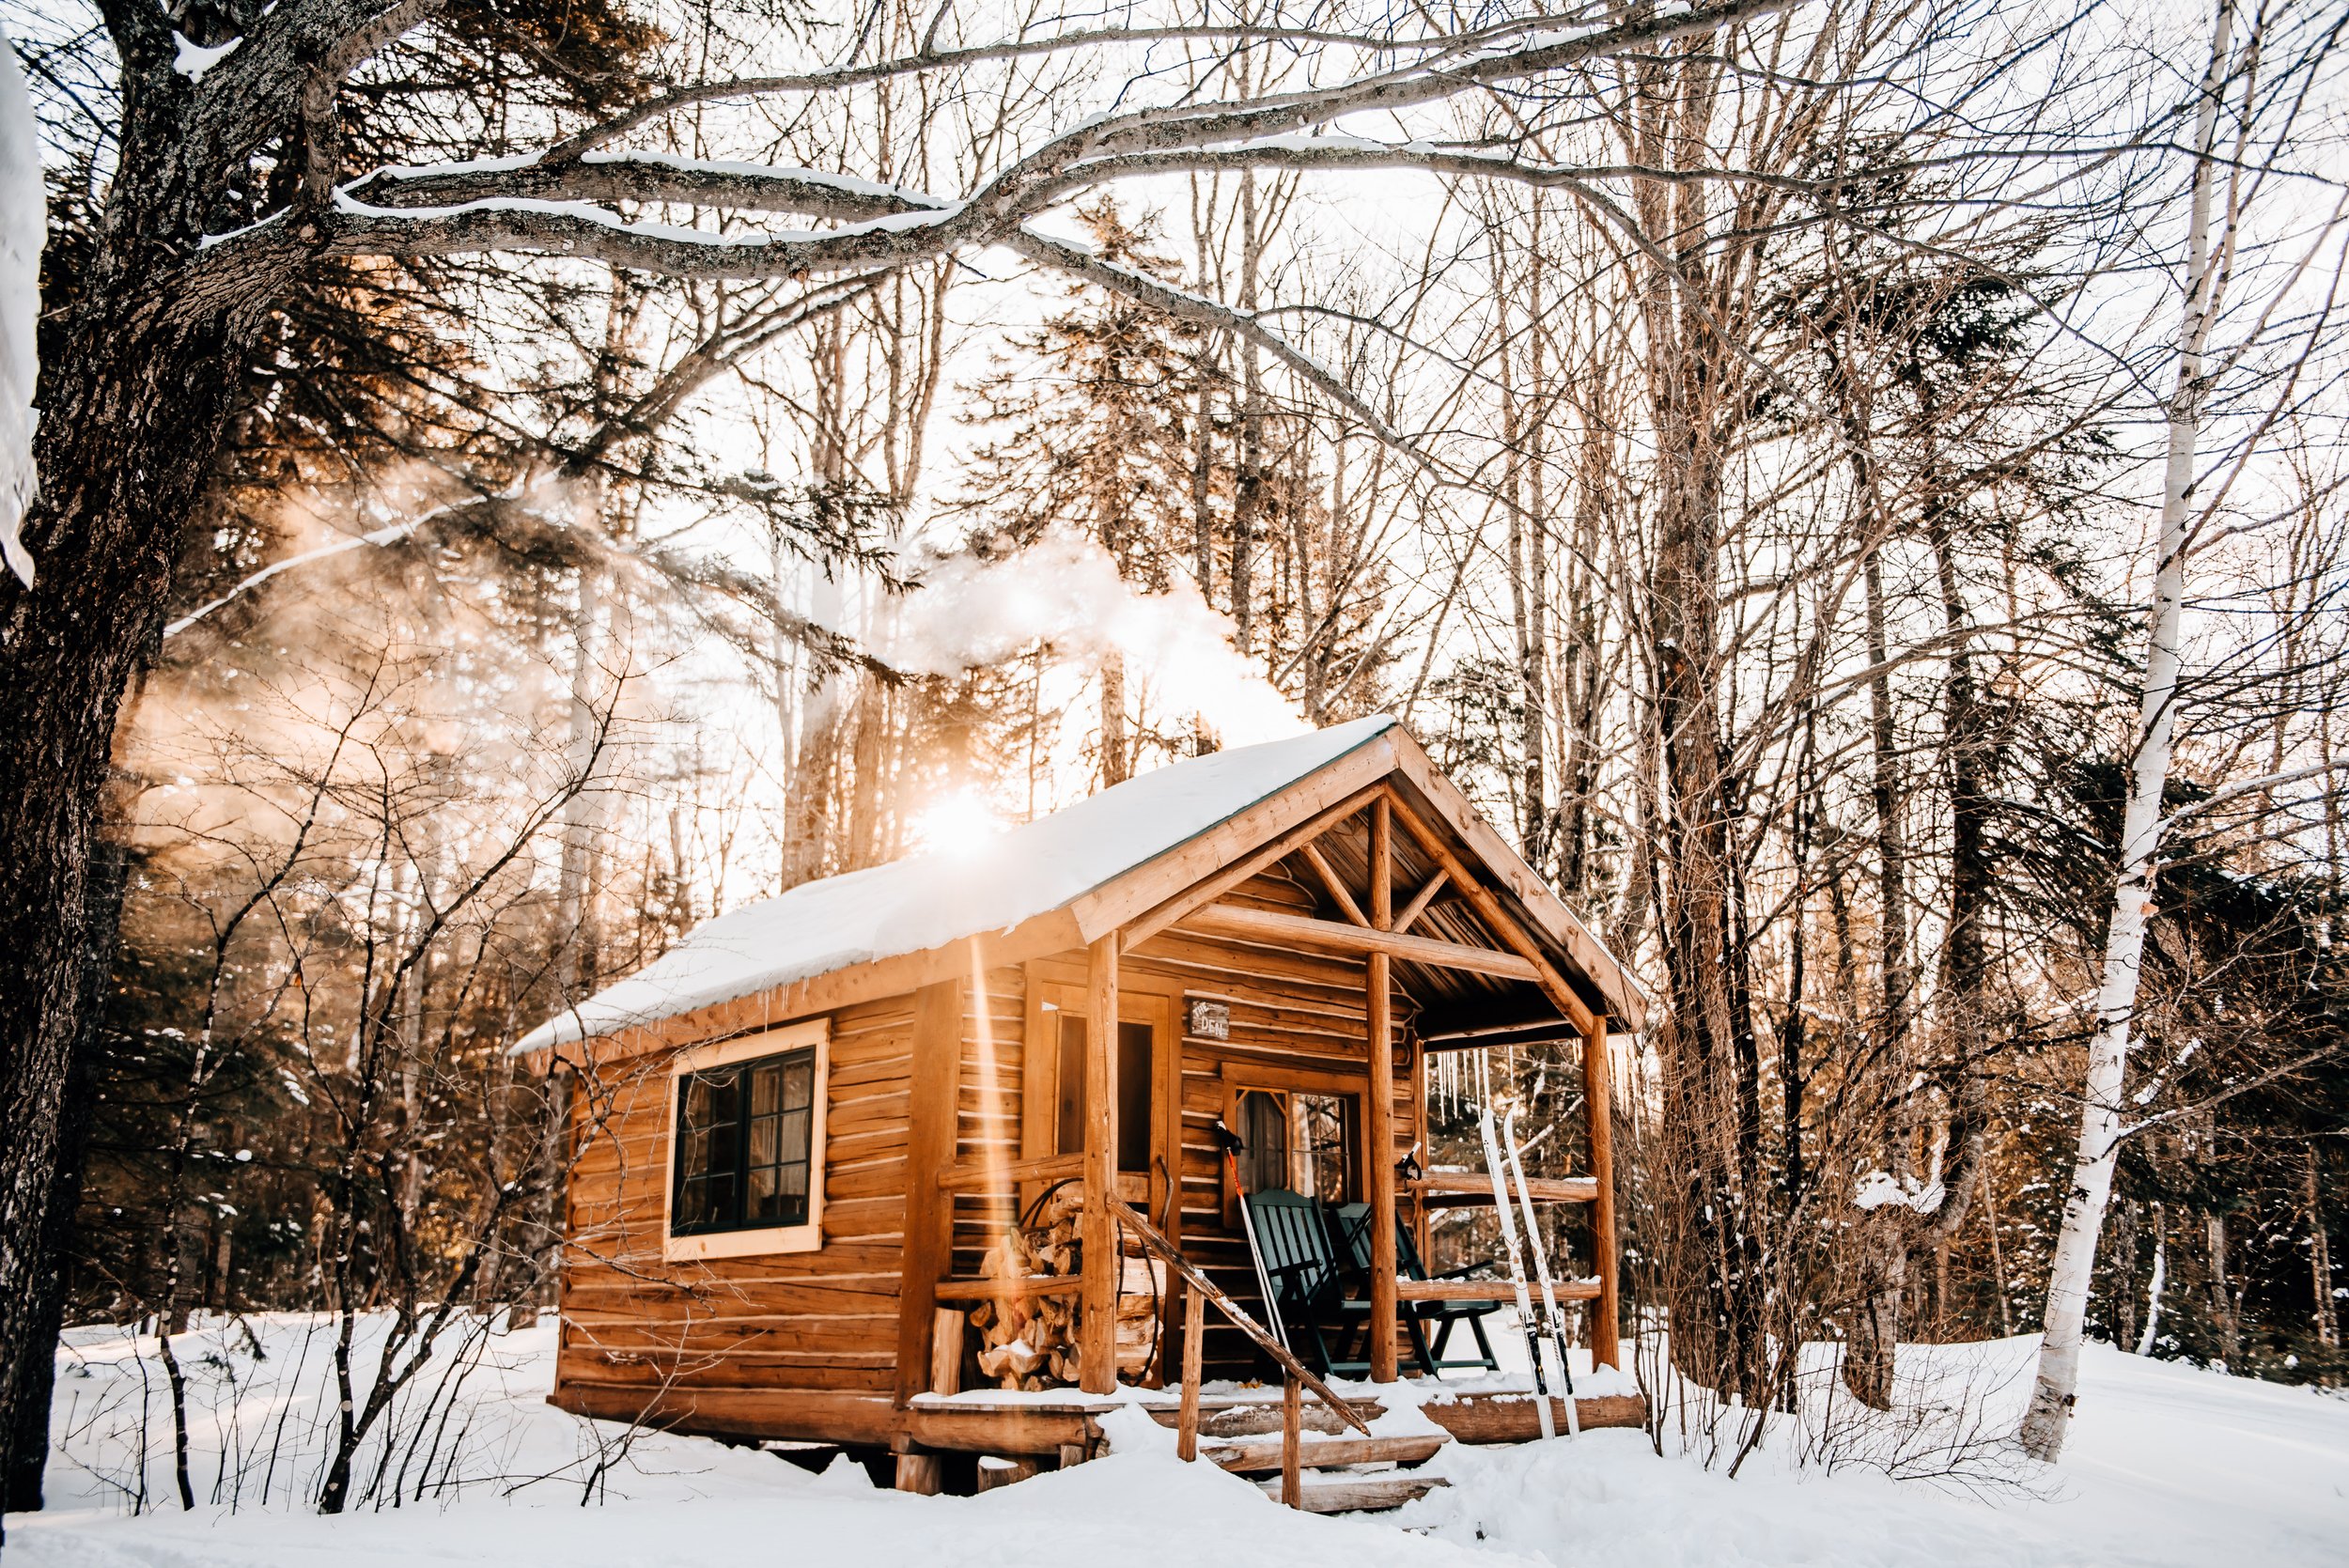 Winter visitors to the AMC’s Gorman Chairback Lodge and Cabins can enjoy overnighting in rustic log cabins on pristine Long Pond. 